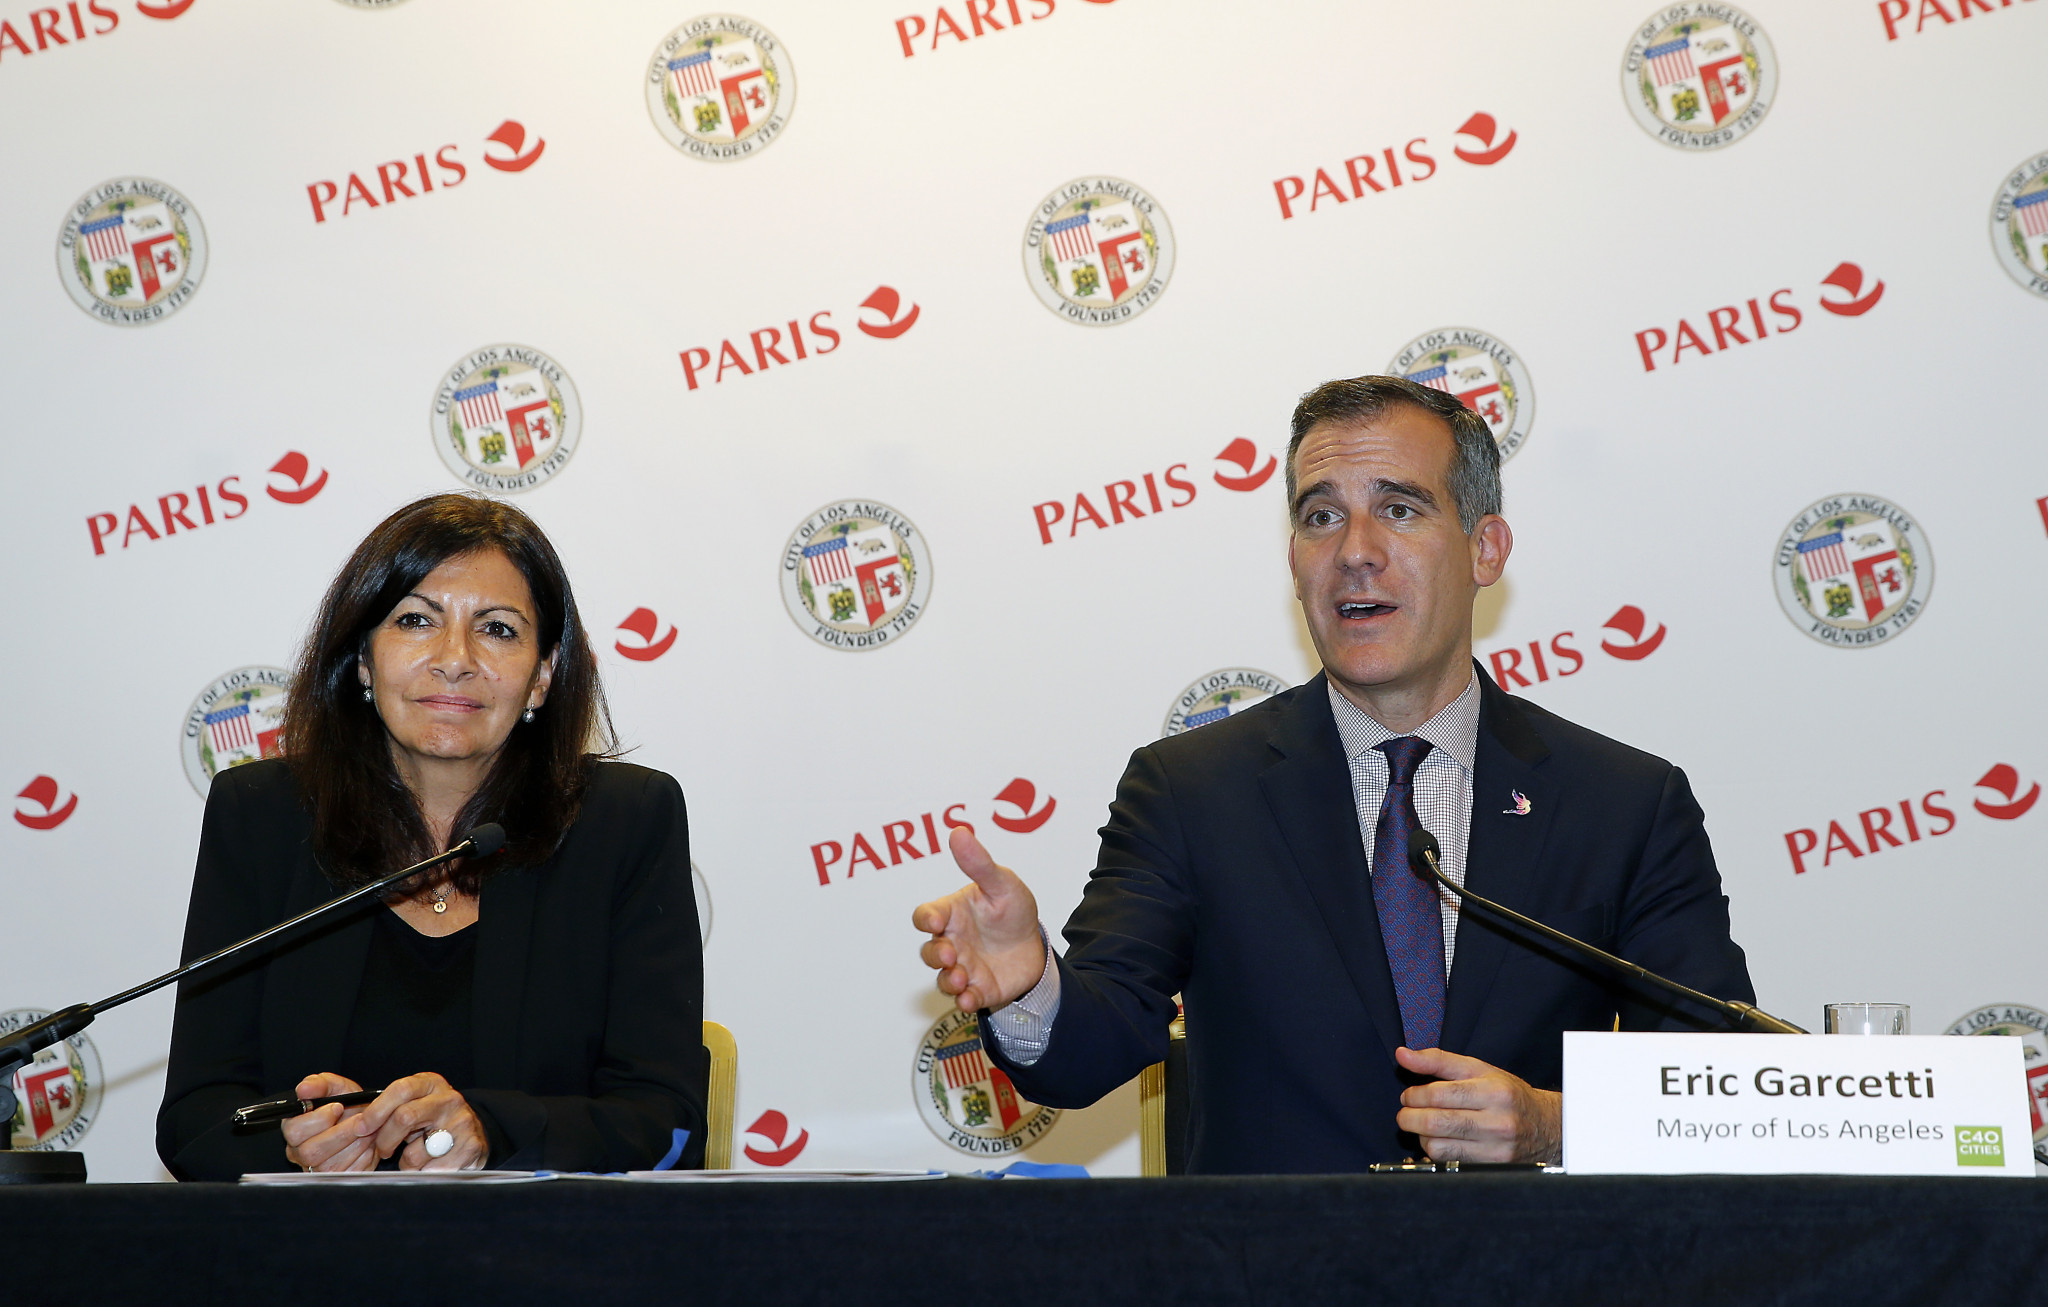 Garcetti says Los Angeles 2028 will uphold values as deal with Paris 2024 is signed